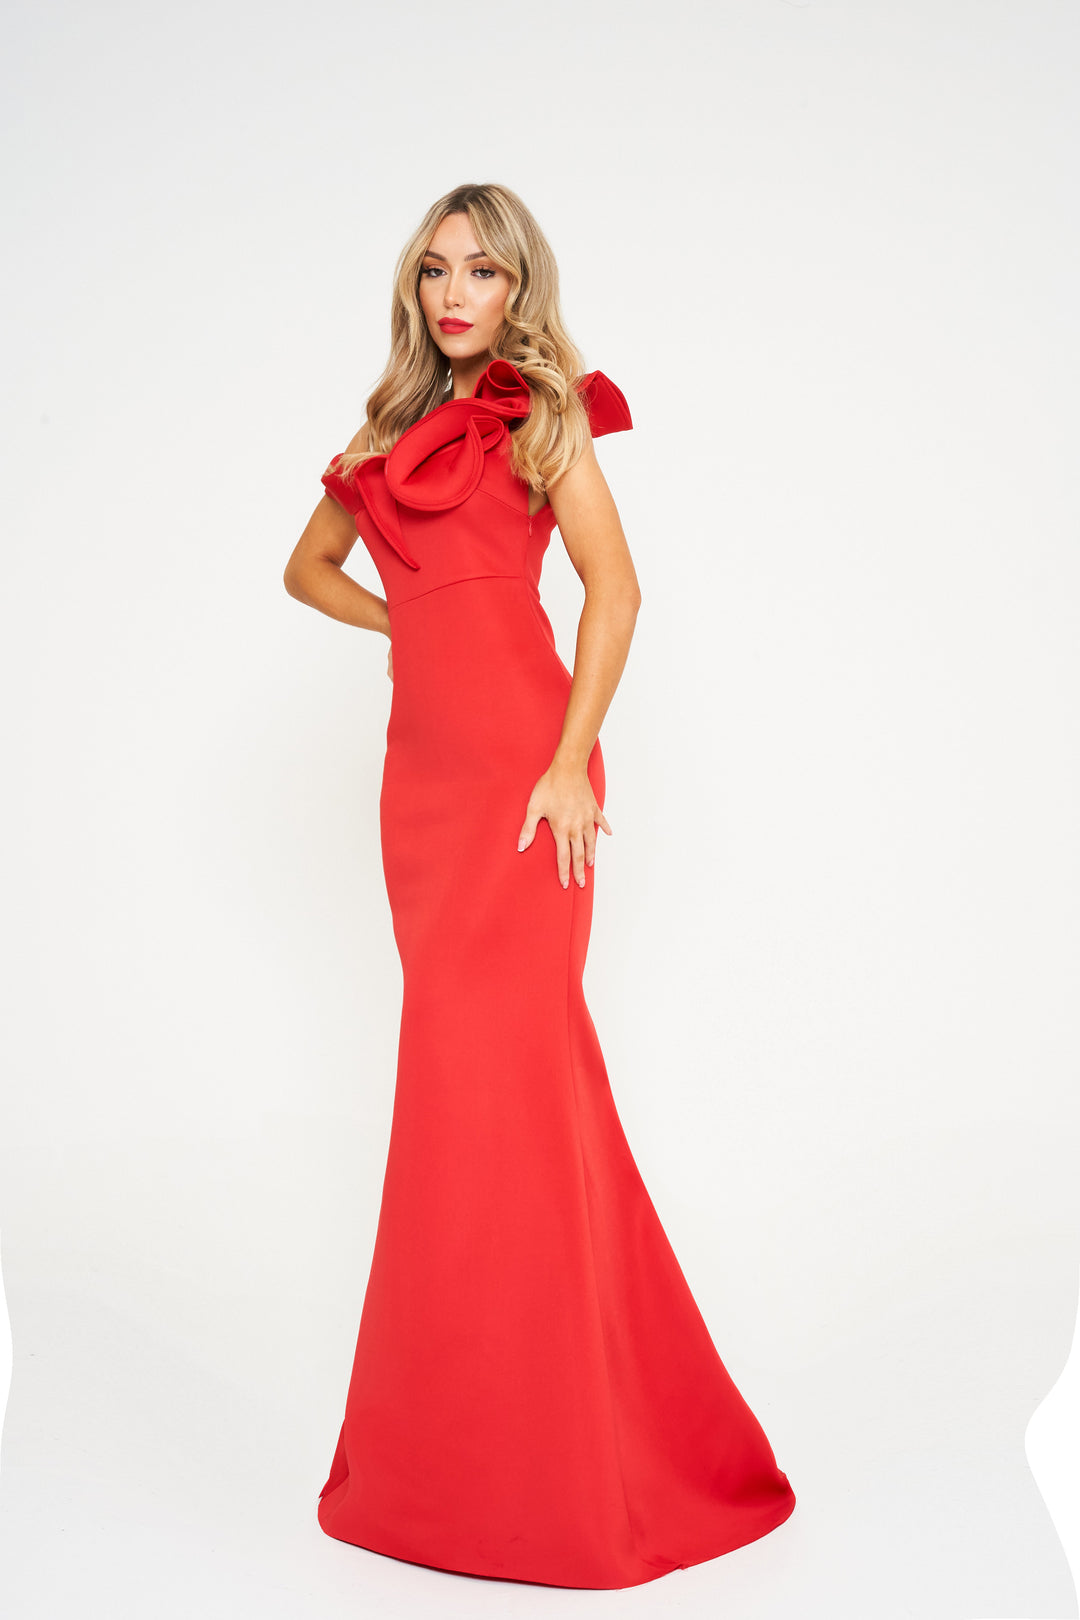 Red Frilled One Shoulder Maxi Dress - Front View Standing Up